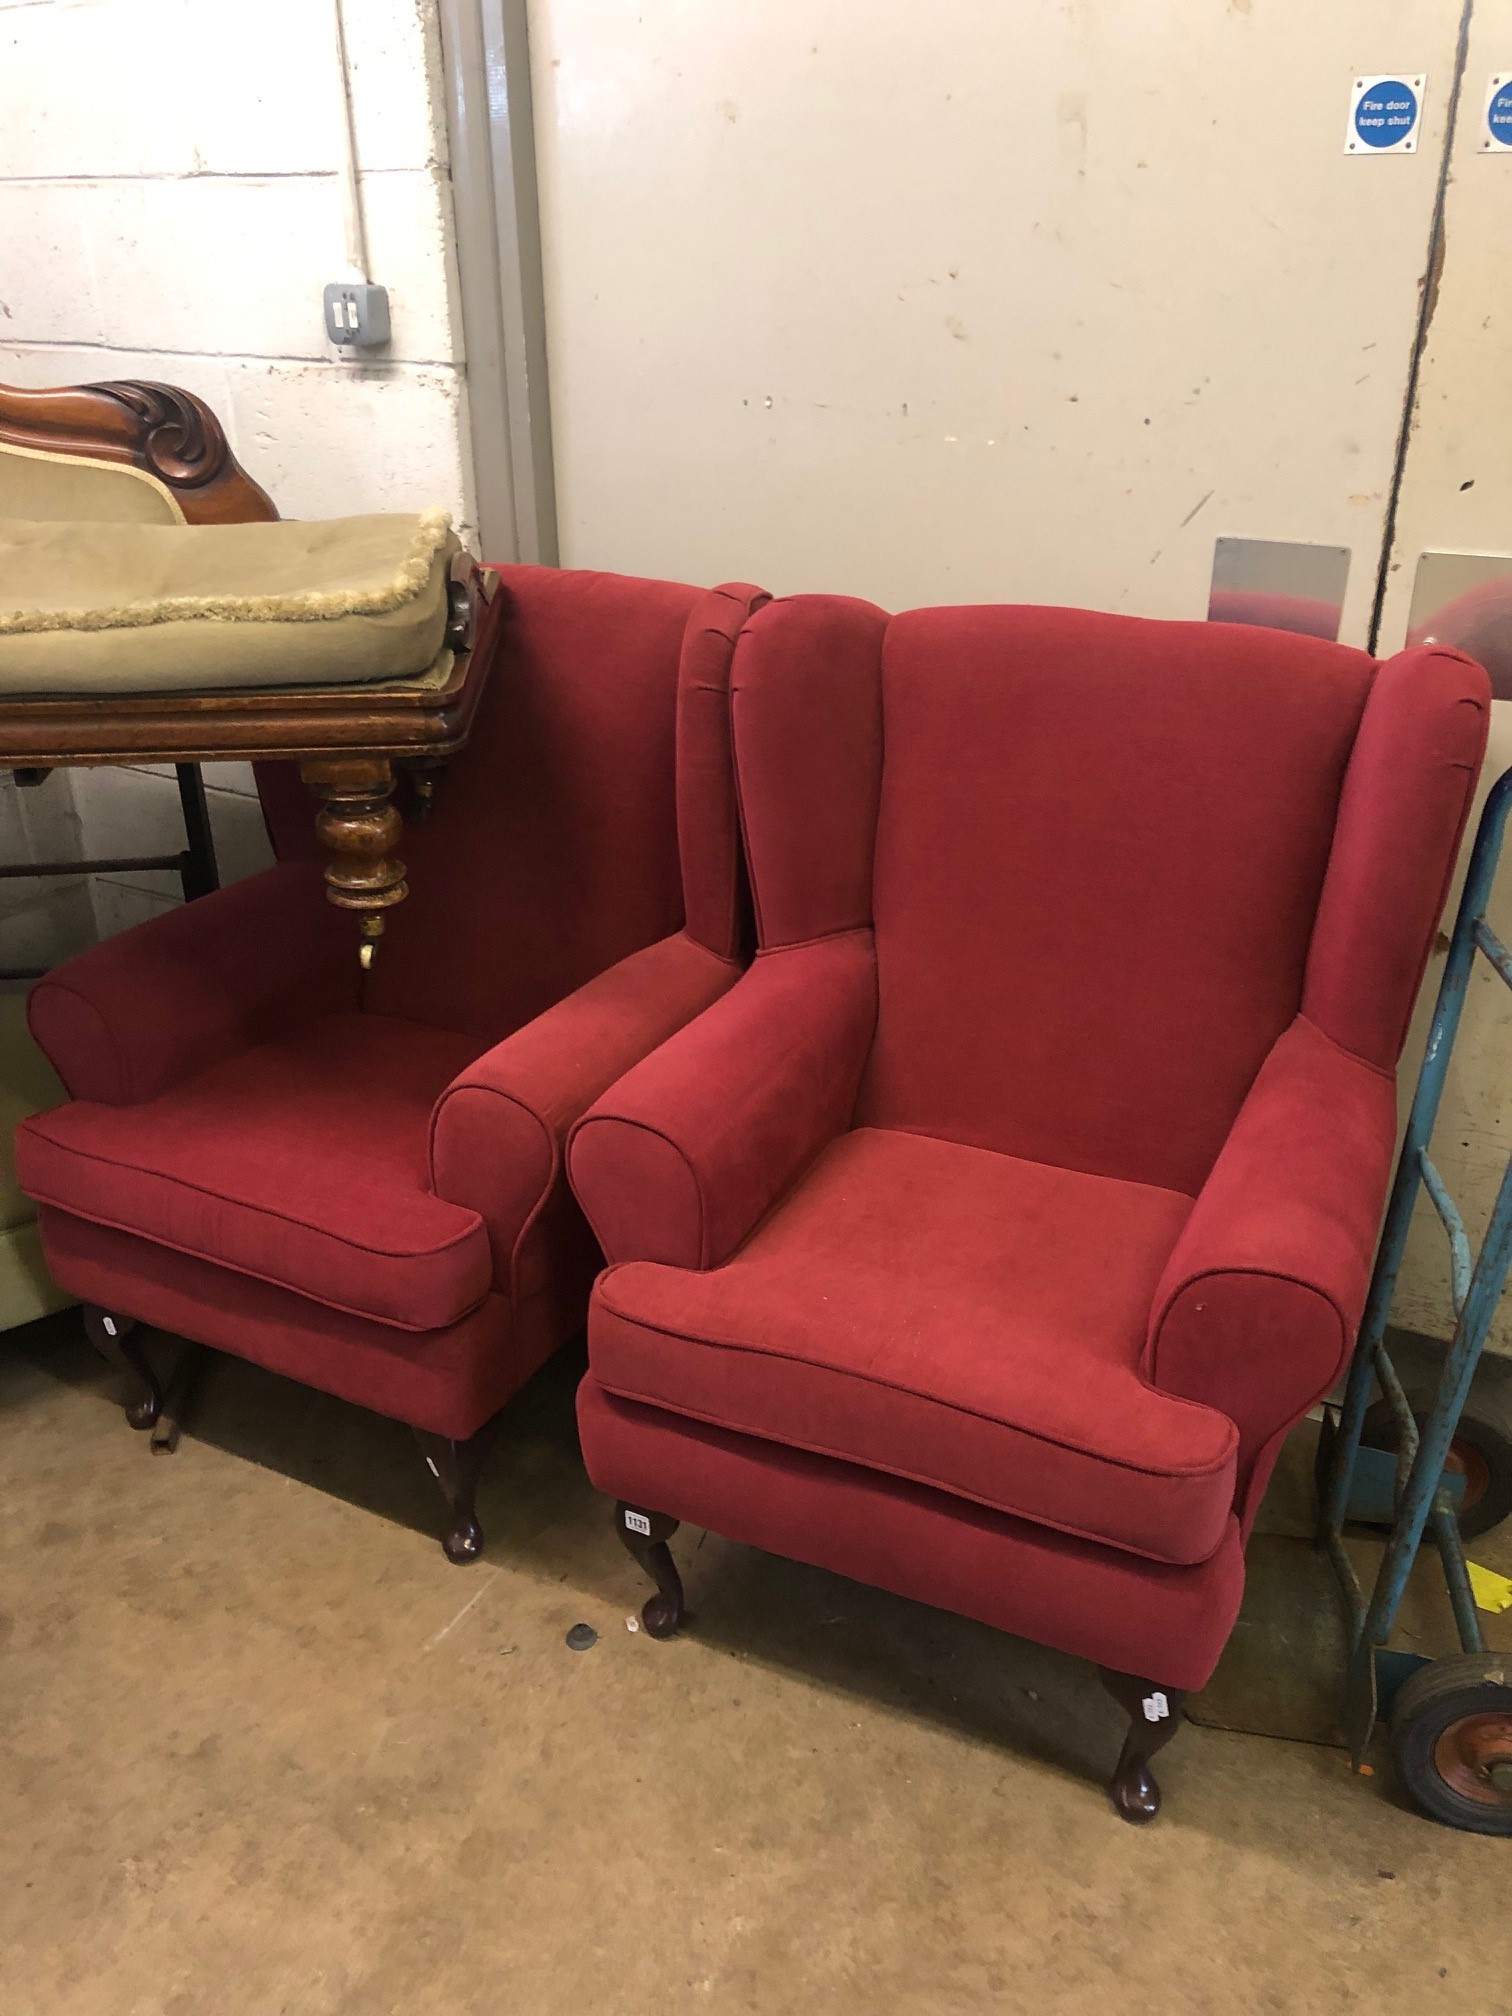 A PAIR OF RED UPHOLSTERED WING BACK ARMCHAIRS